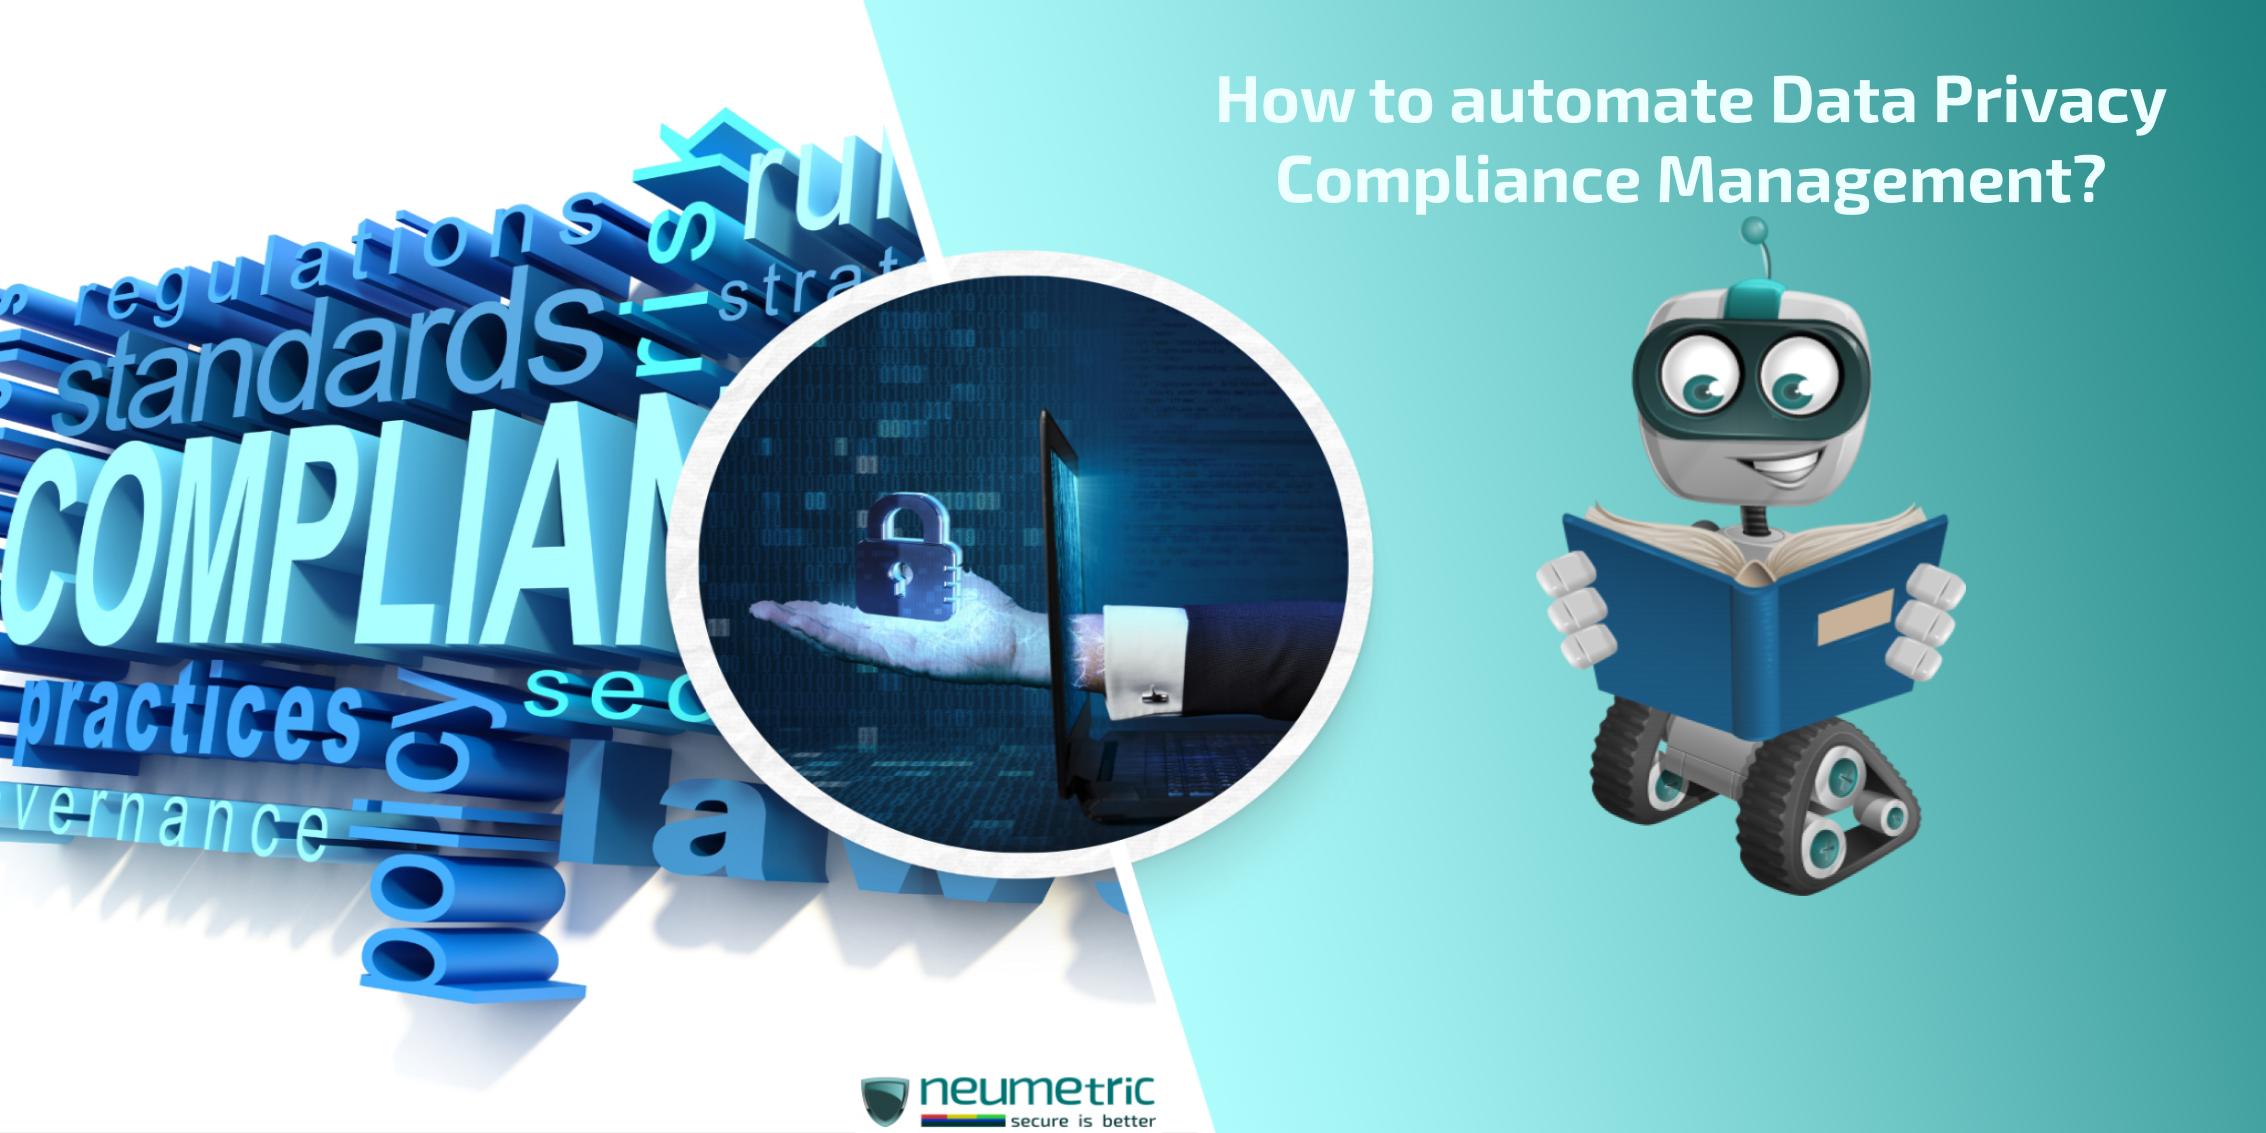 Data privacy compliance management